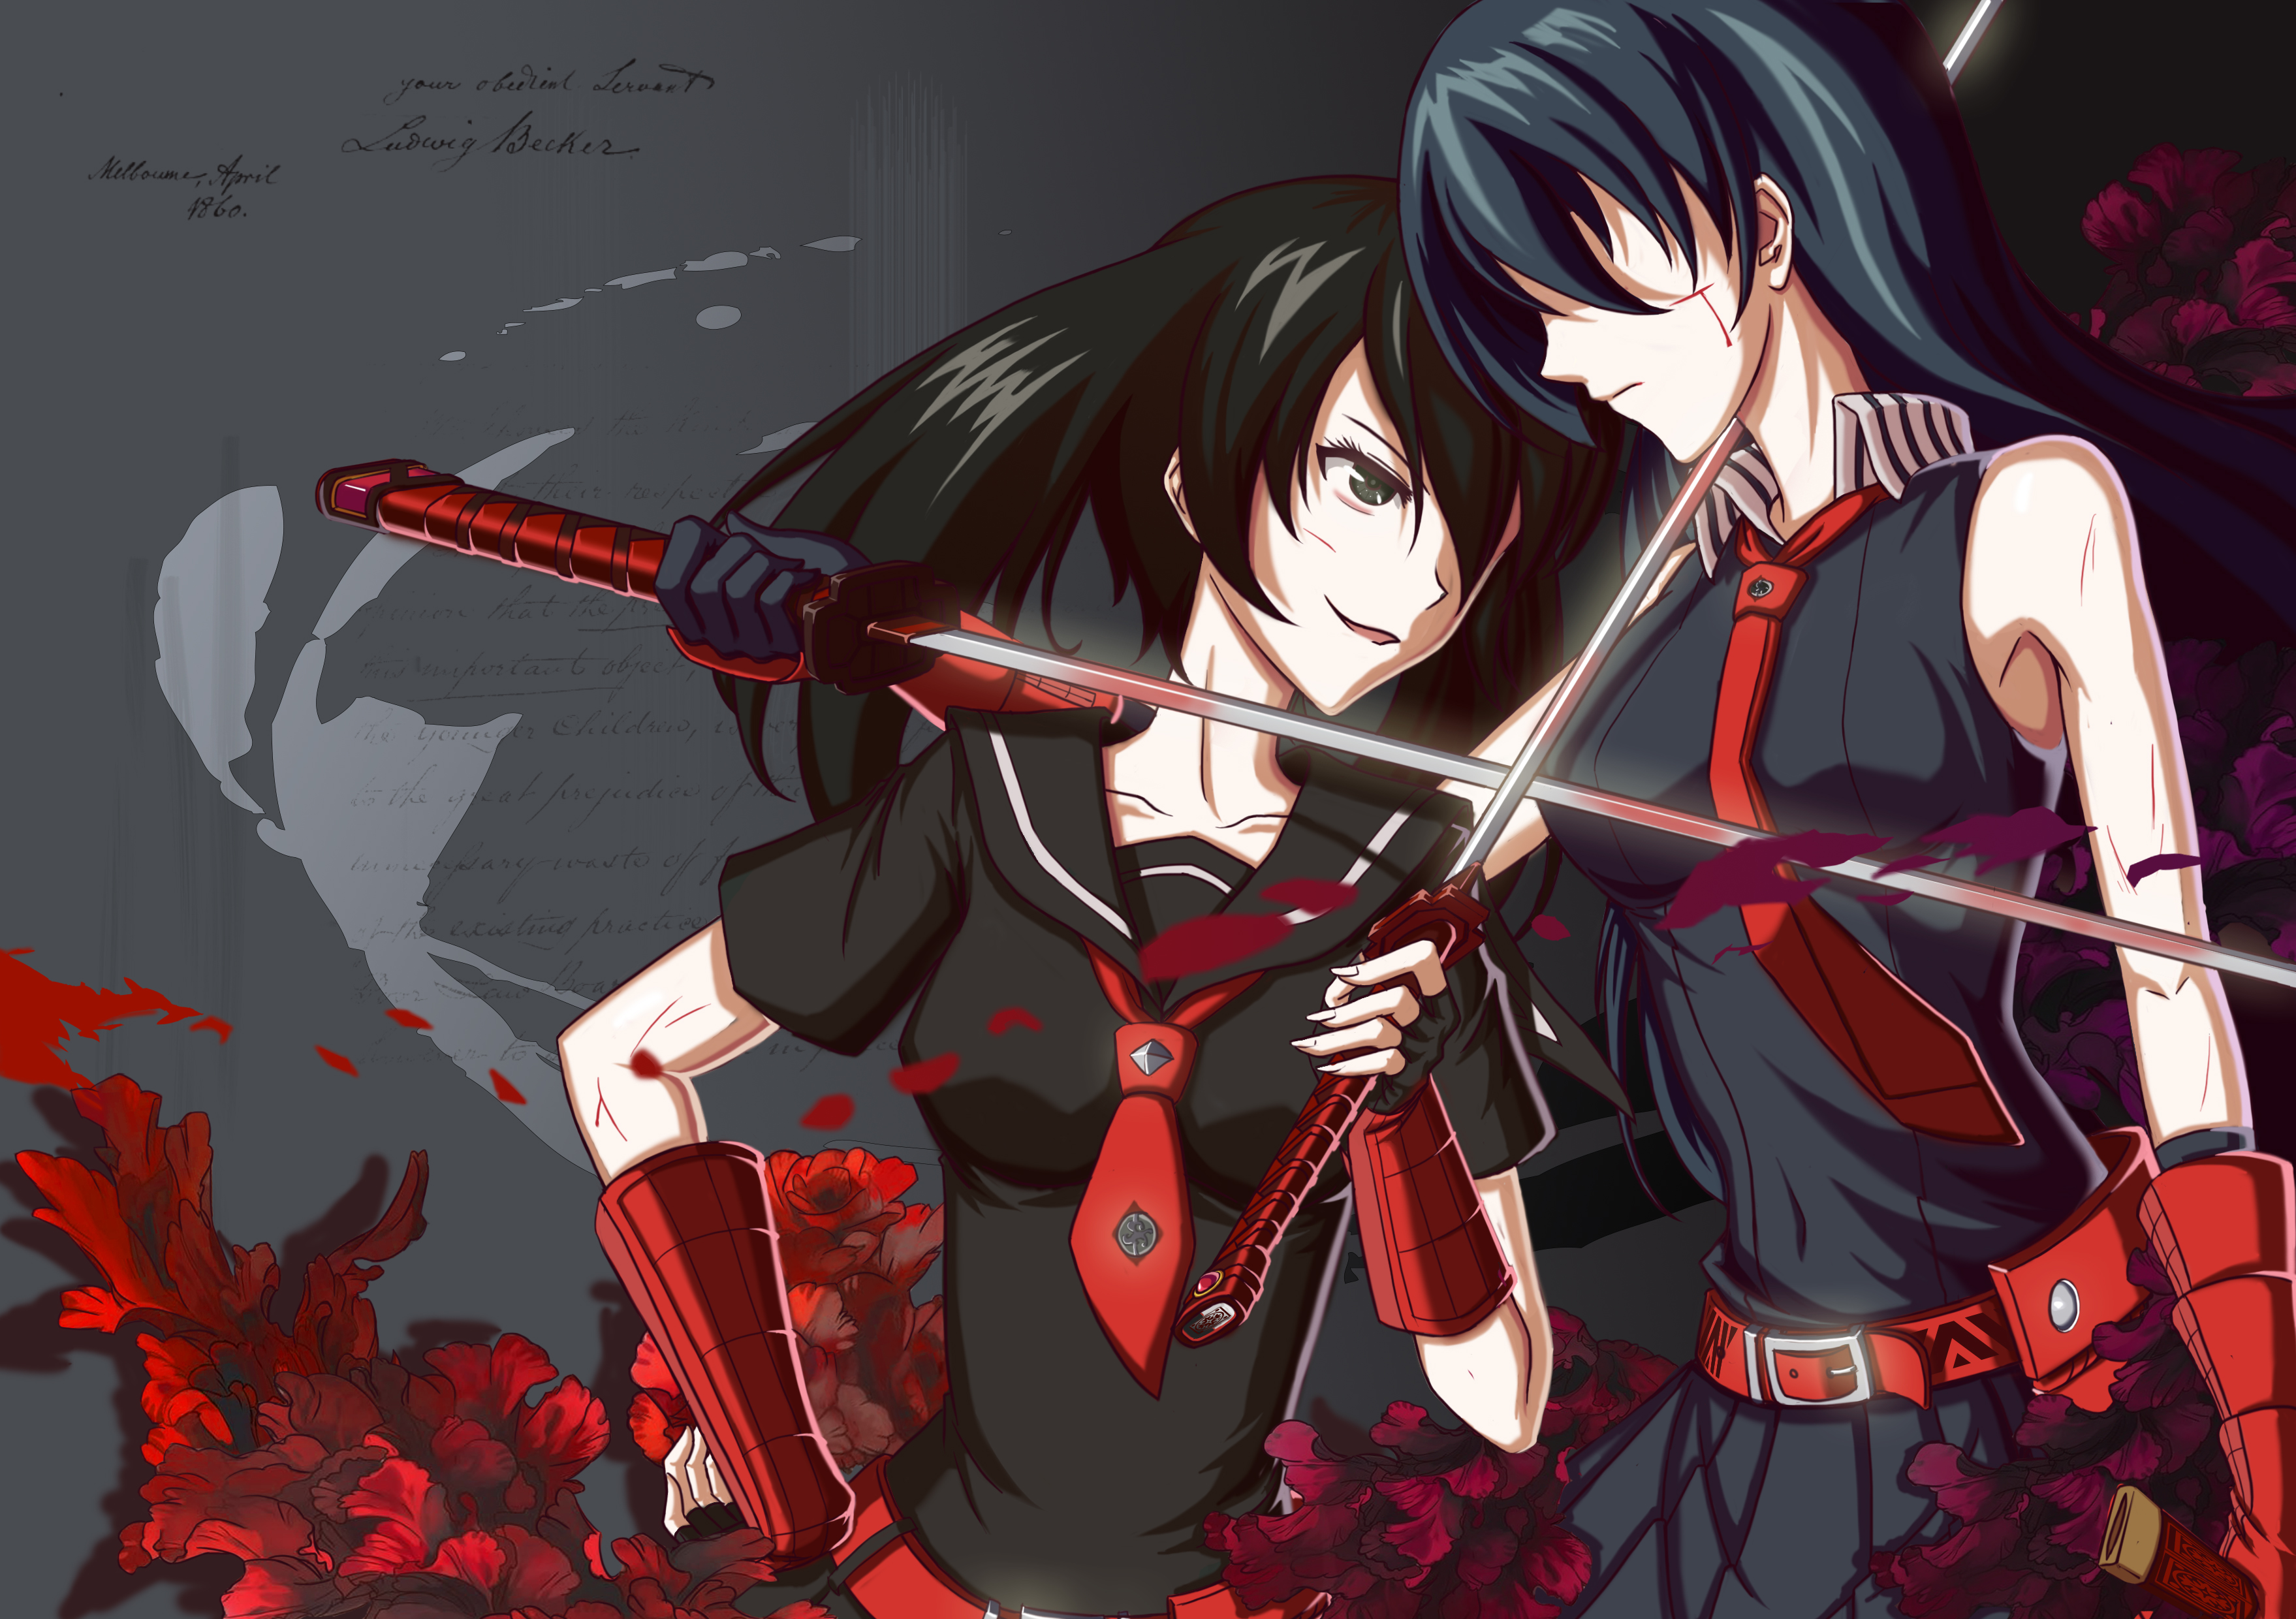 Akame Ga Kill! Backgrounds, Compatible - PC, Mobile, Gadgets| 3517x2480 px